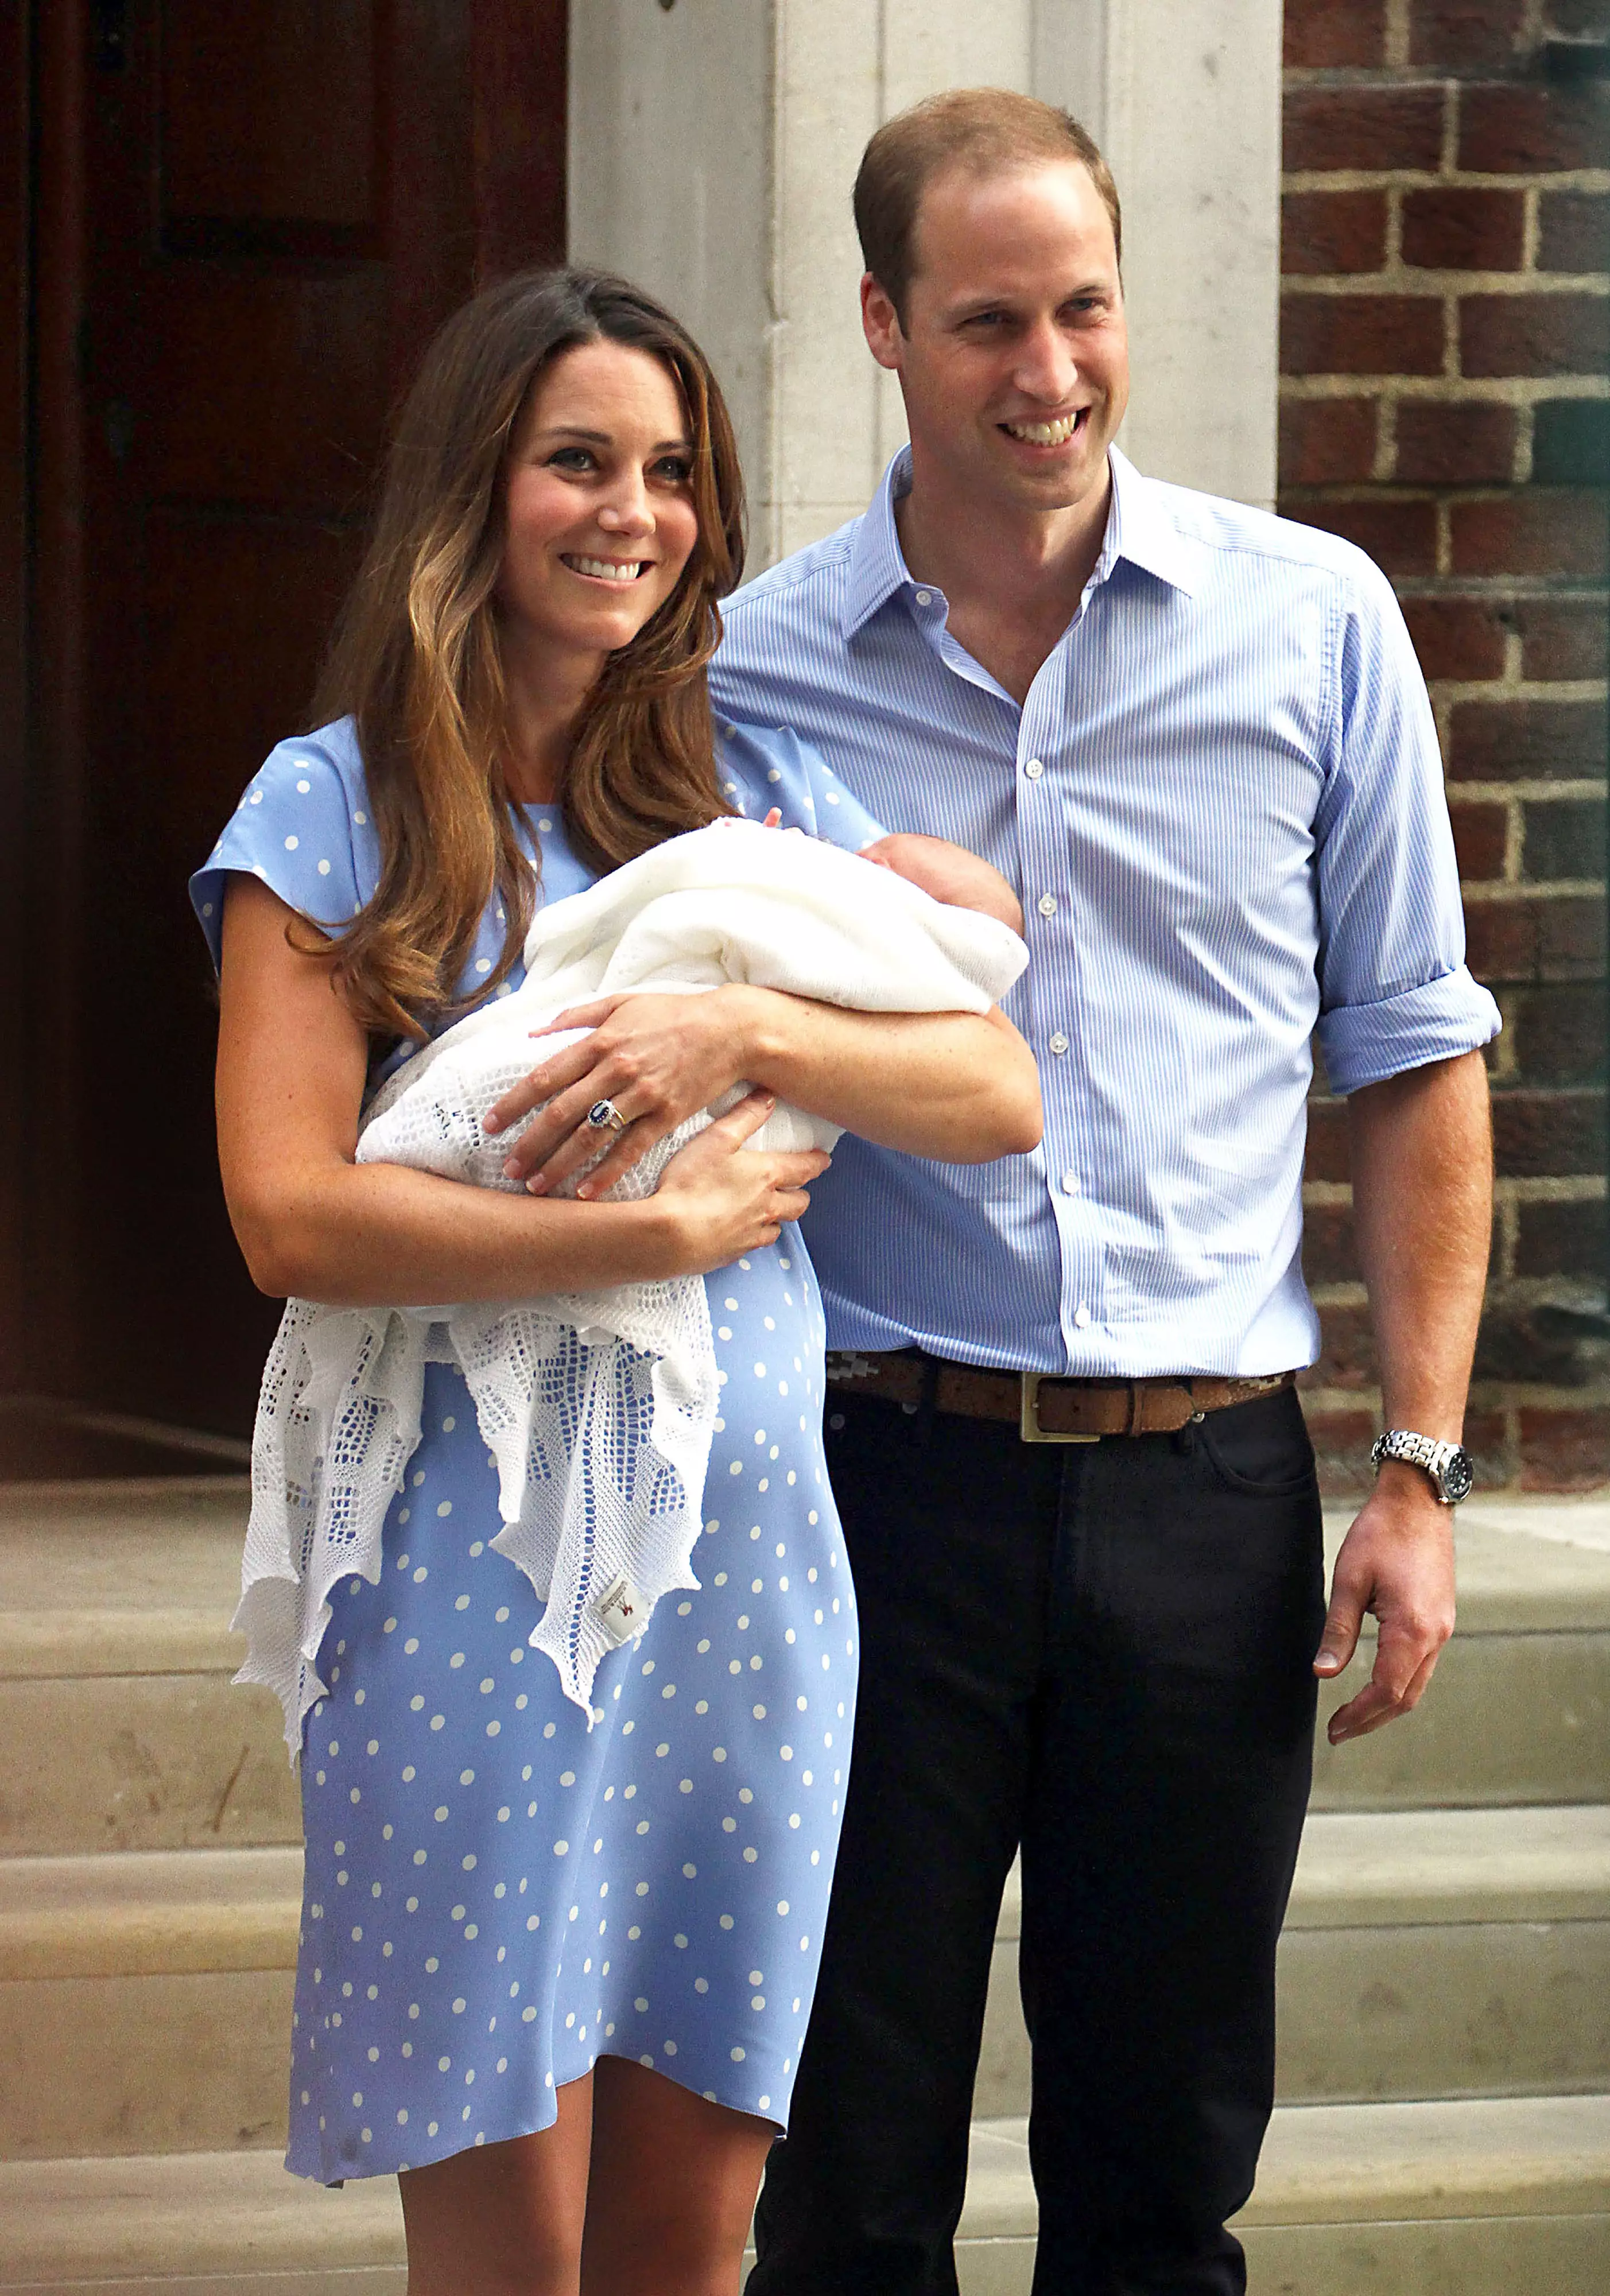 Prince George welcomed to the world on 22nd July, 2013.